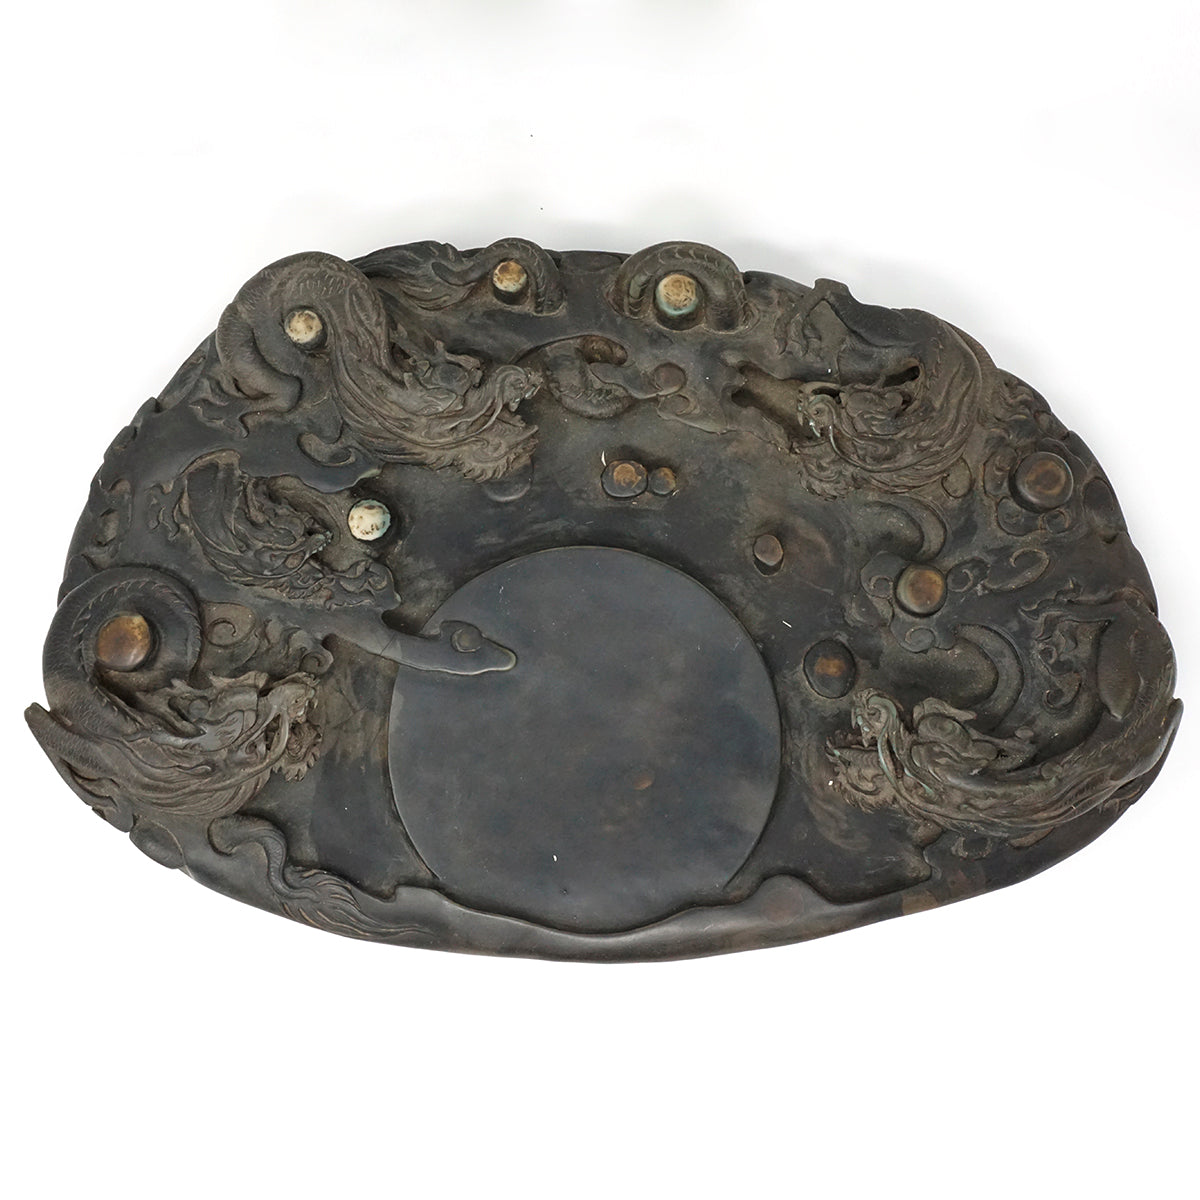 Chinese Ink Stone with Archaic Water Dragon Design